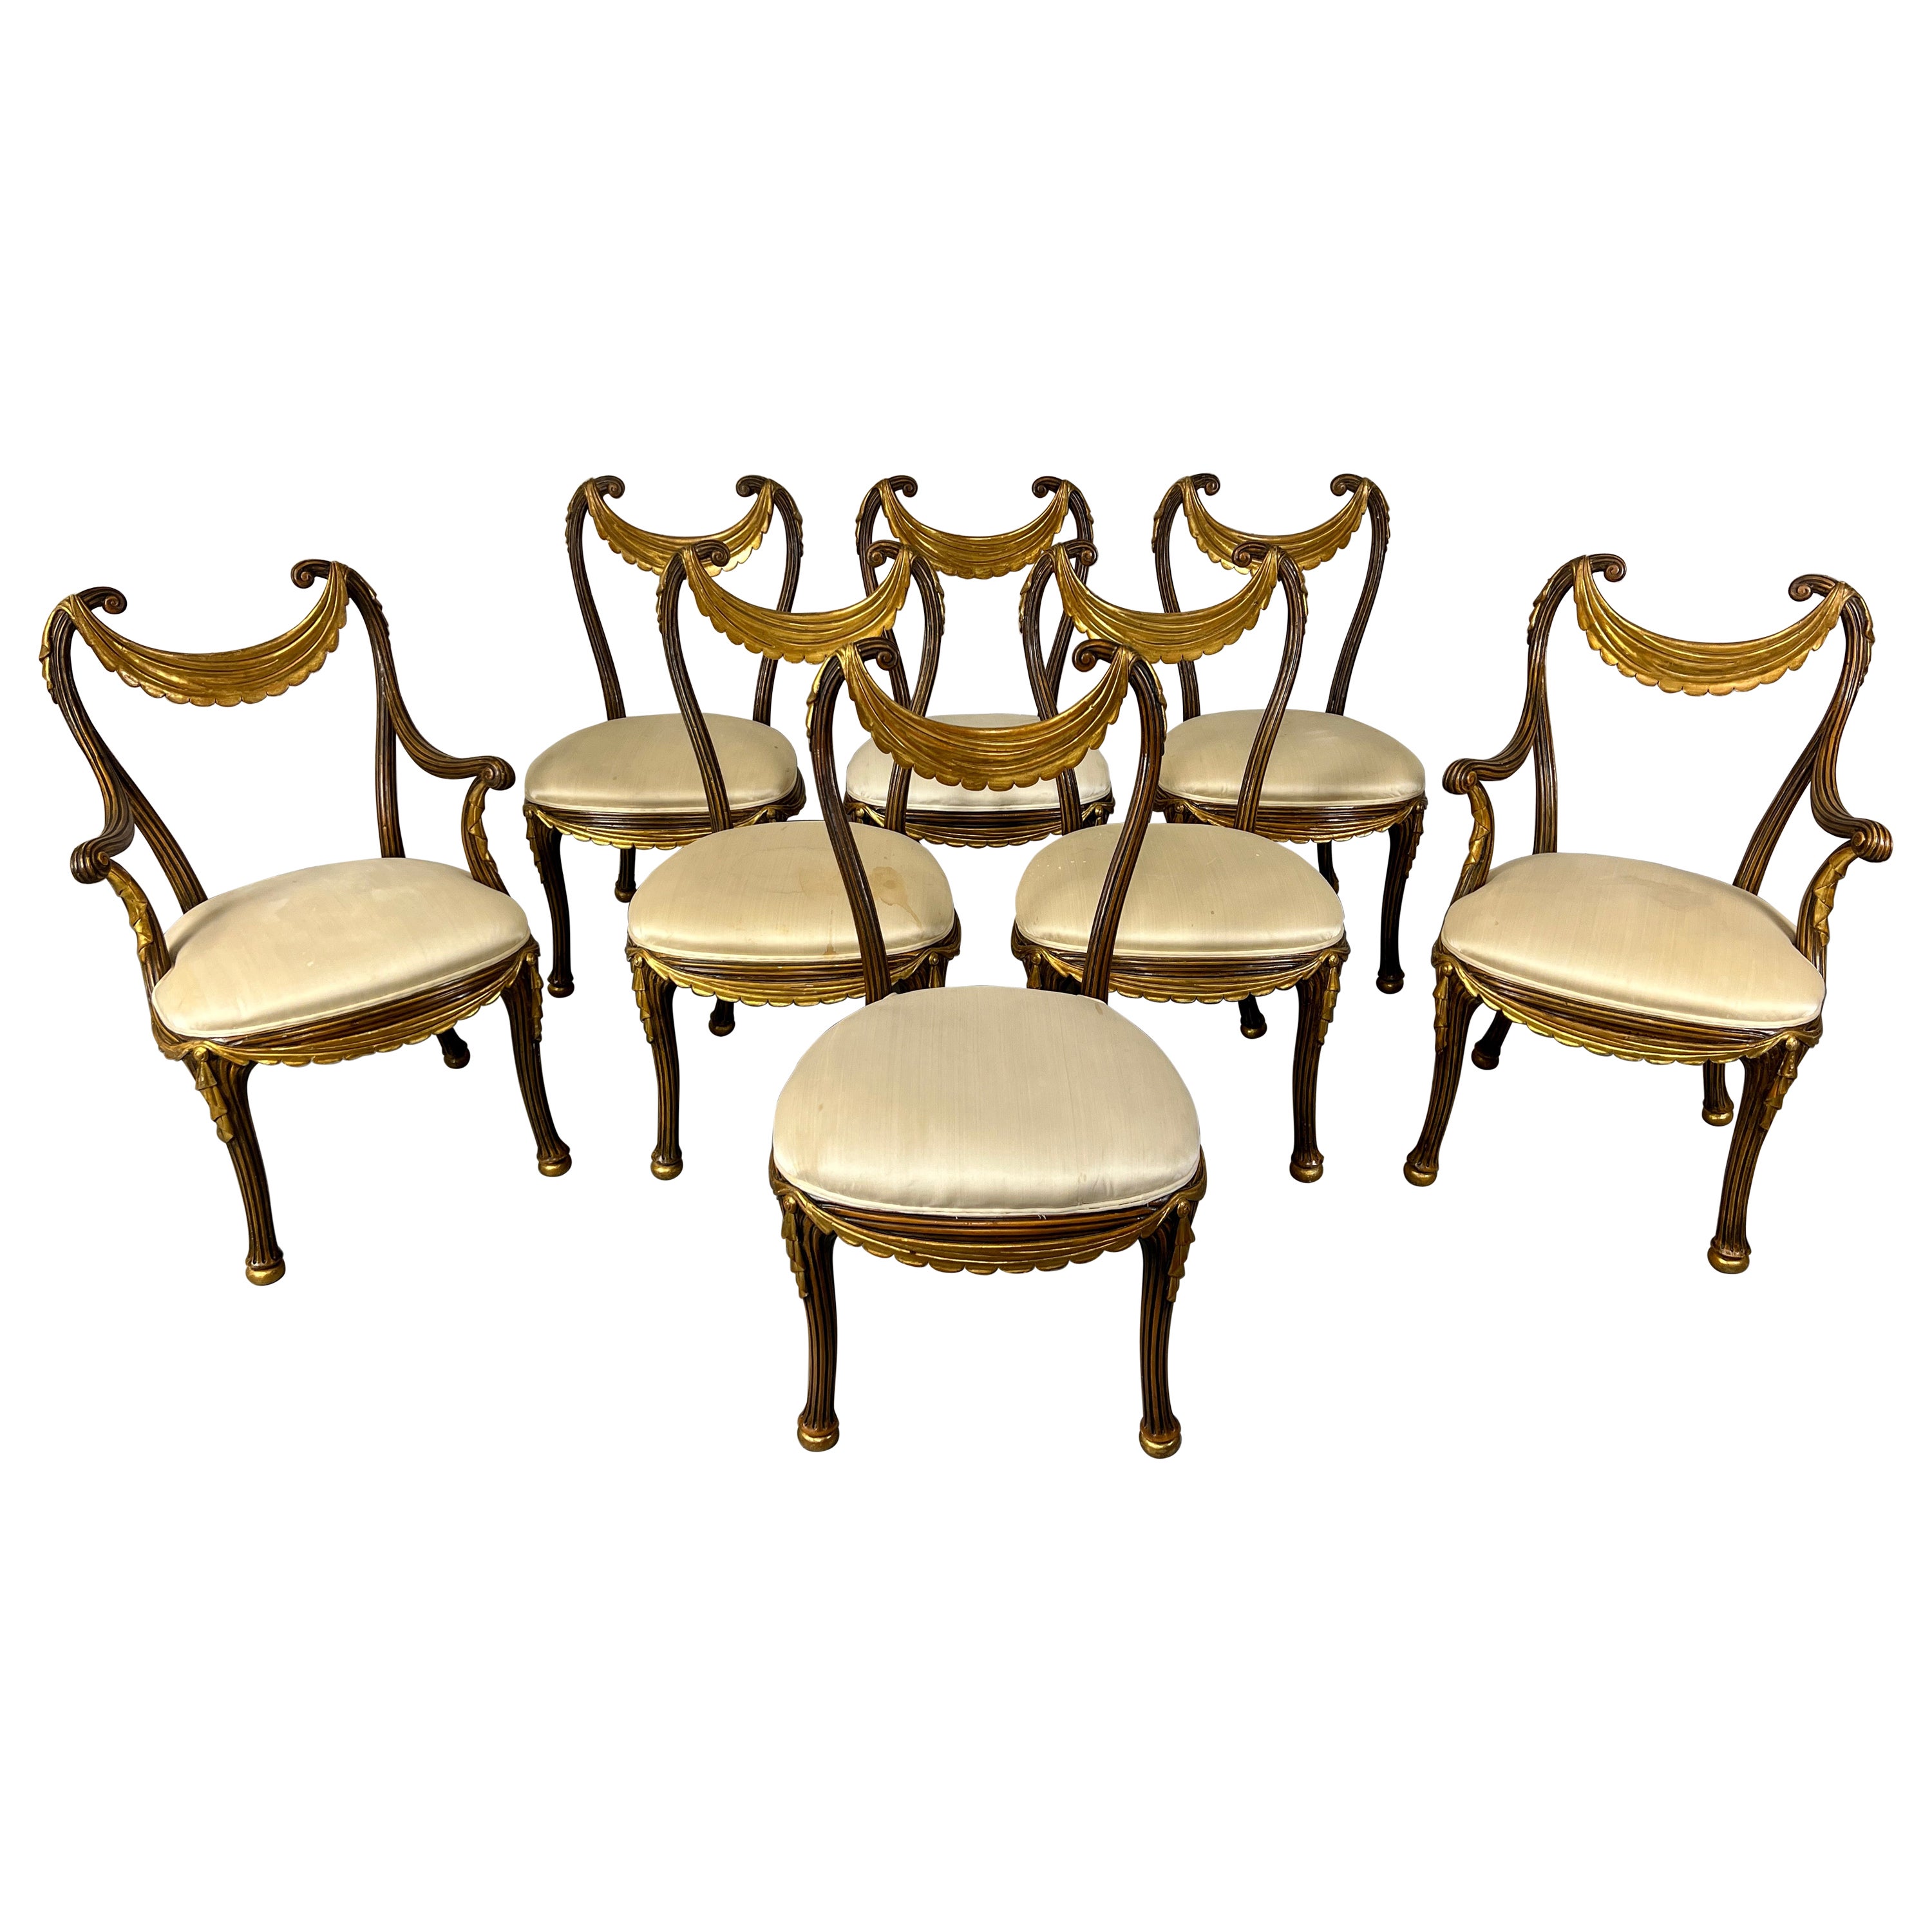 1930s Italian Partial Gilt Dining Chairs